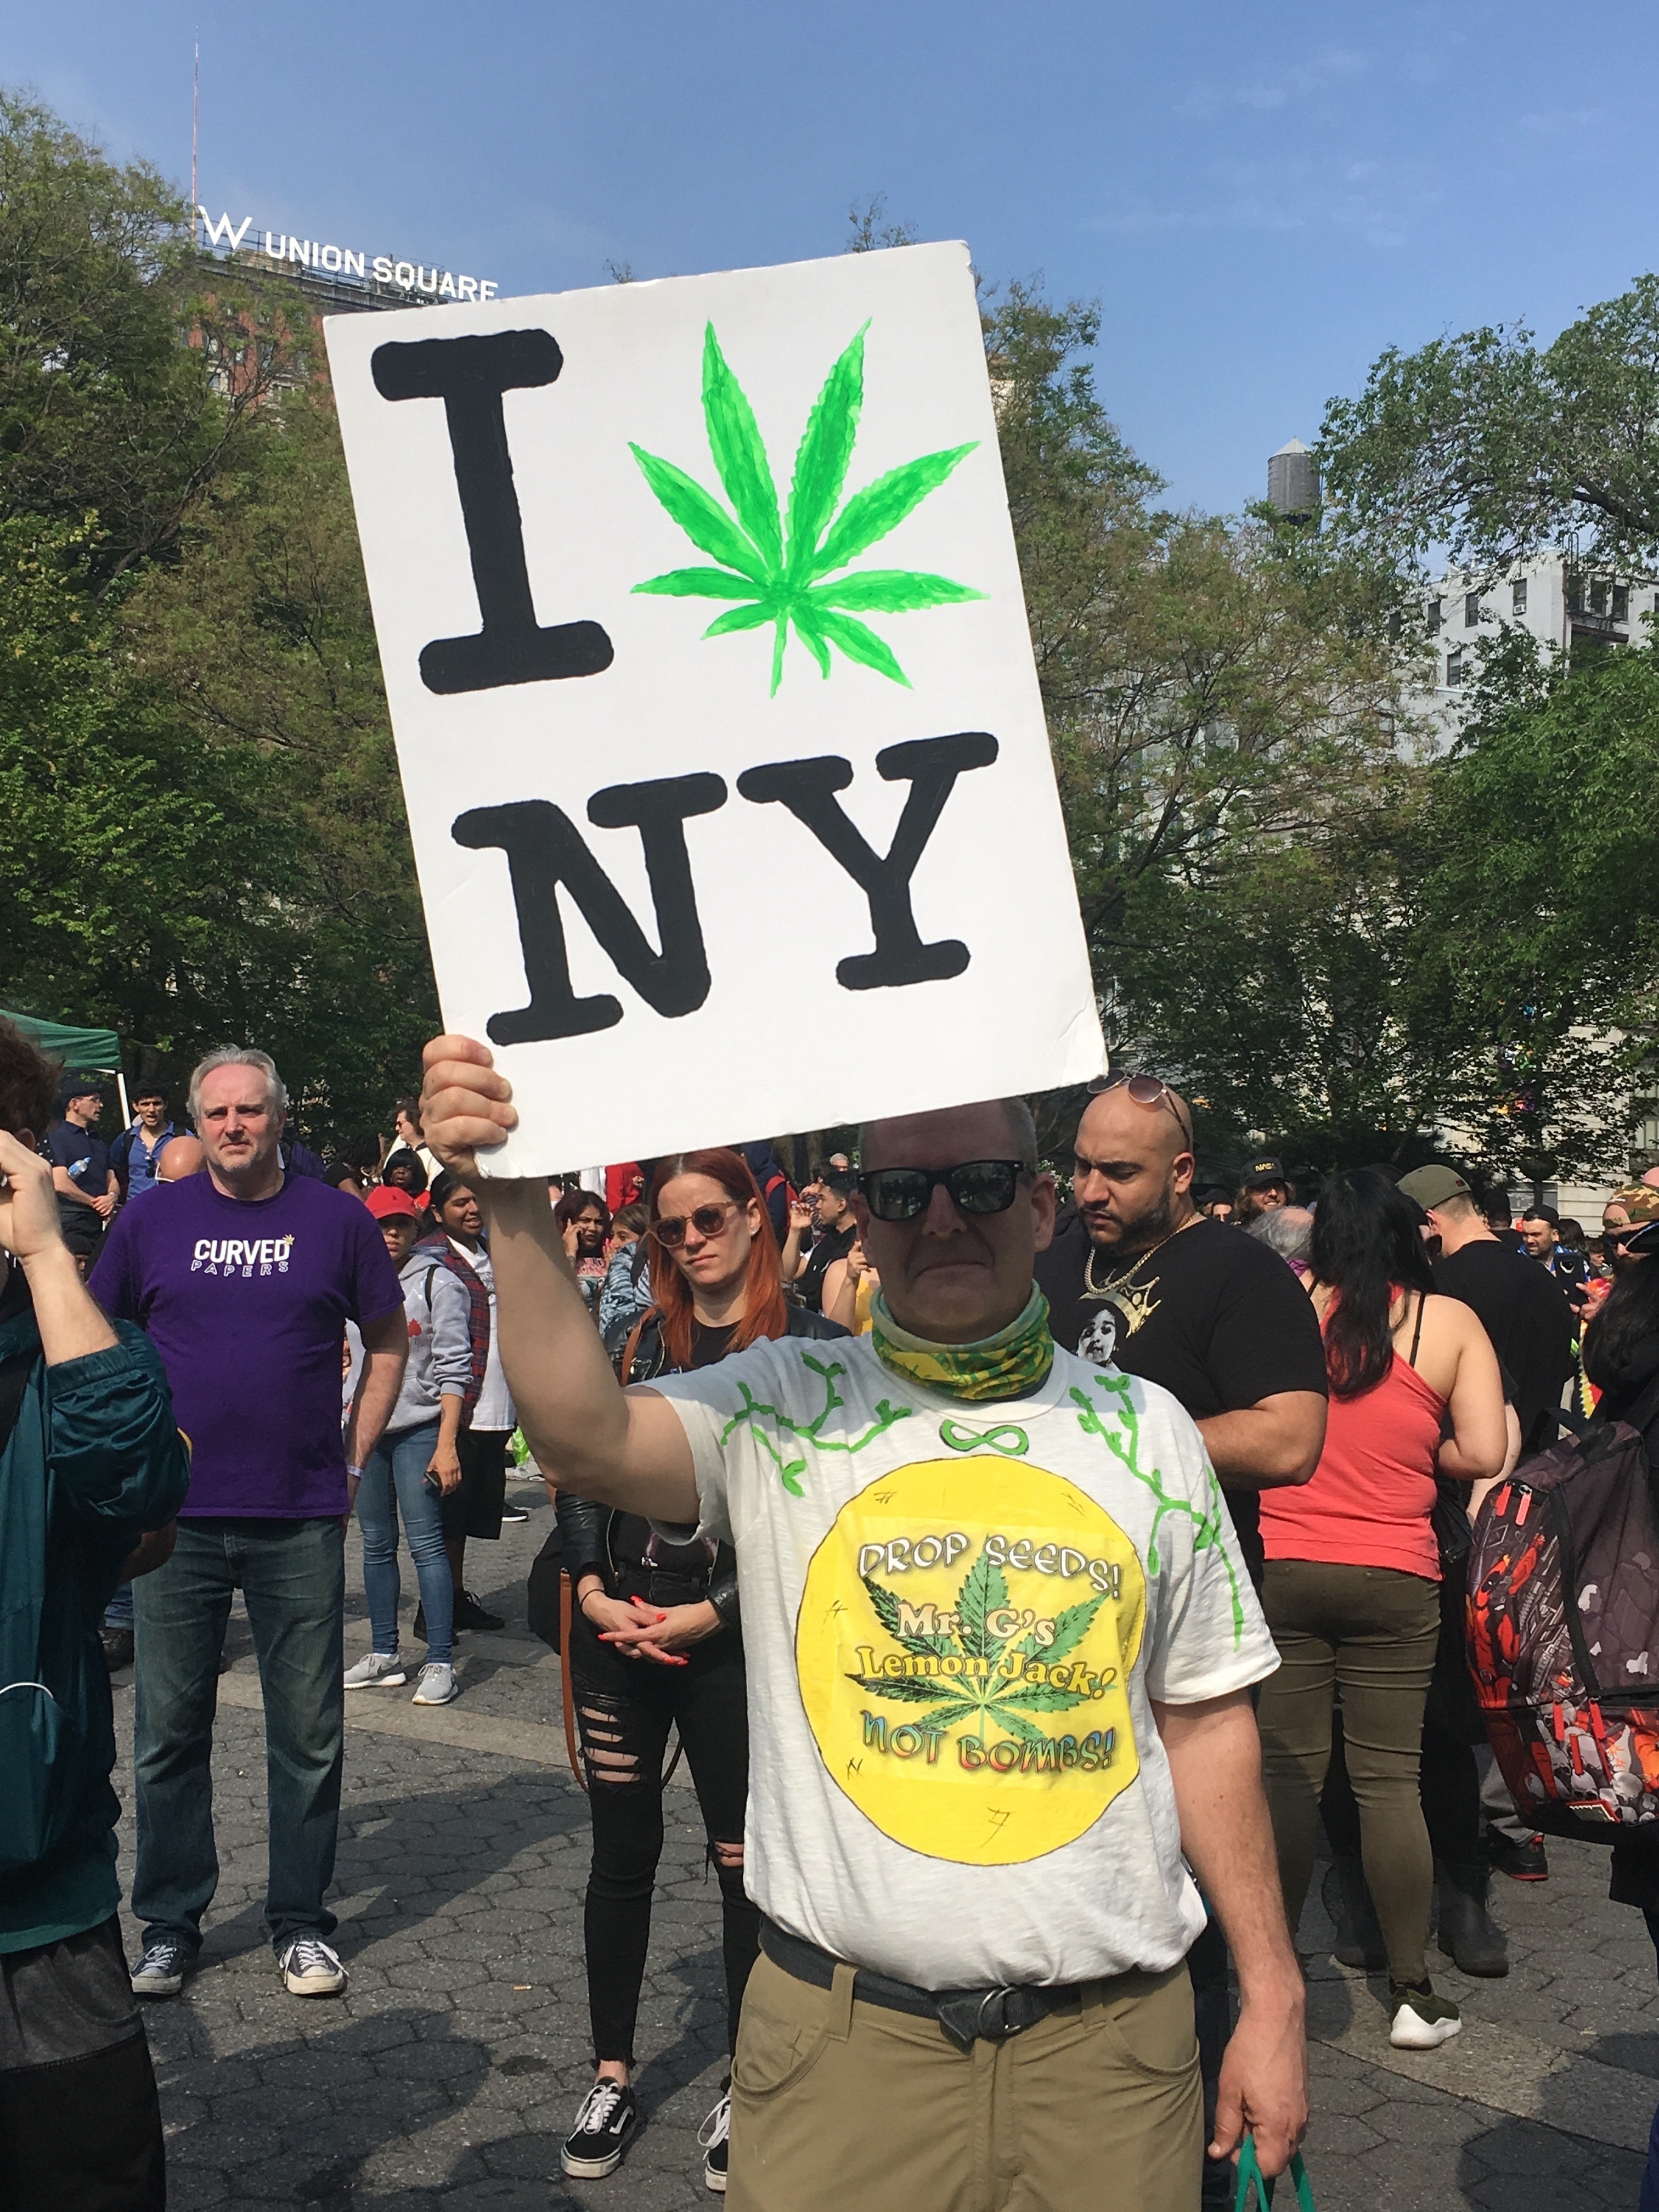 New York's First Legal Cannabis Dispensaries Coming Soon, Red Tape Getting Shorter